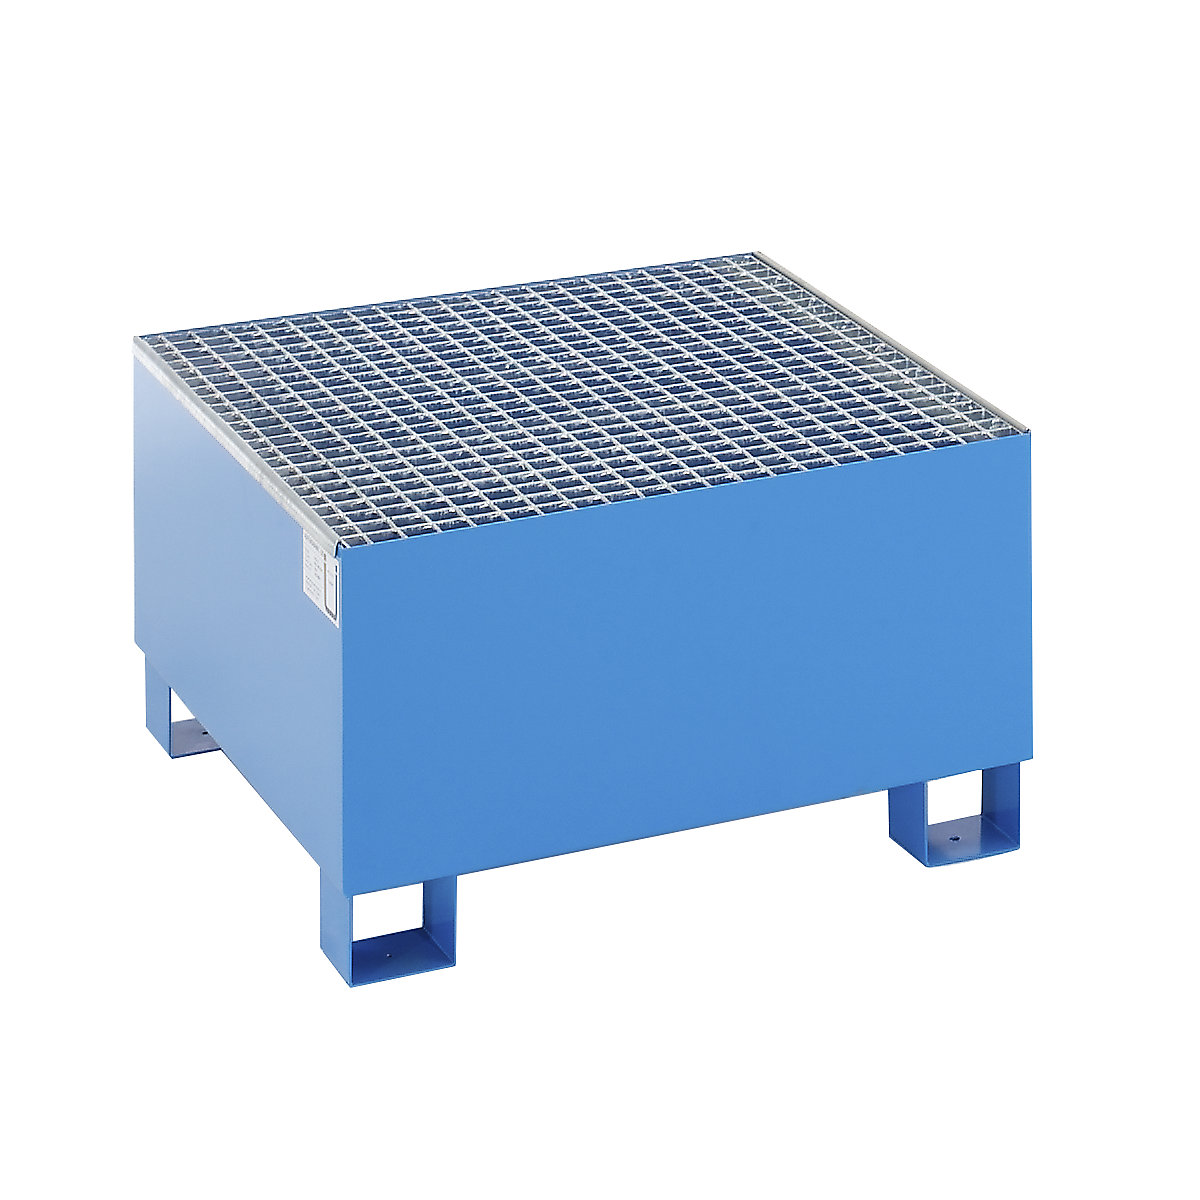 Steel sump tray for 200 l drums – eurokraft basic, LxWxH 800 x 800 x 465 mm, with certification, powder coated blue, with grate-5